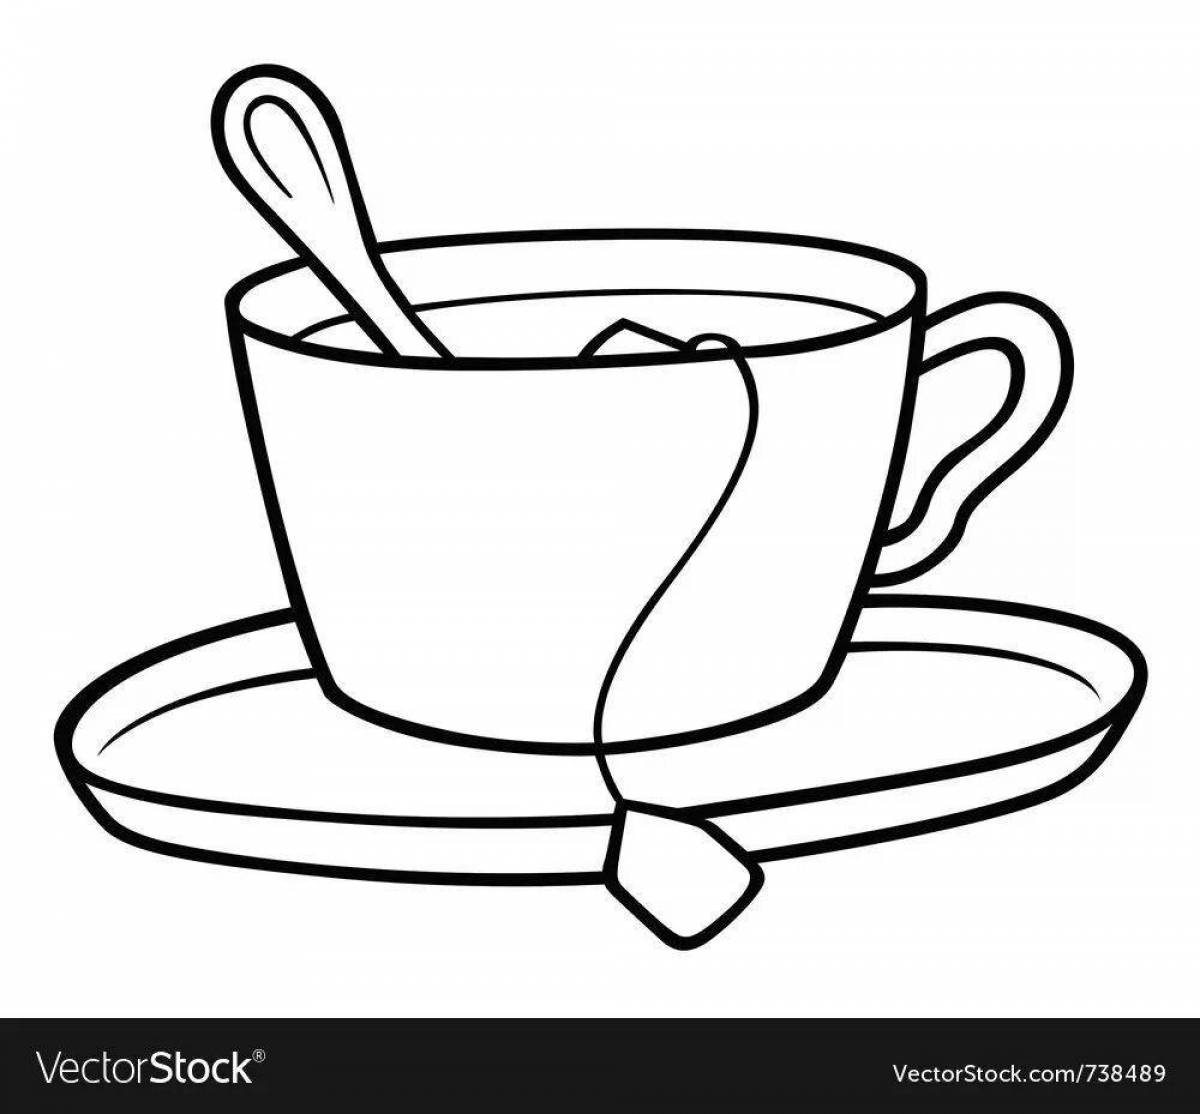 Colouring bright cup of tea